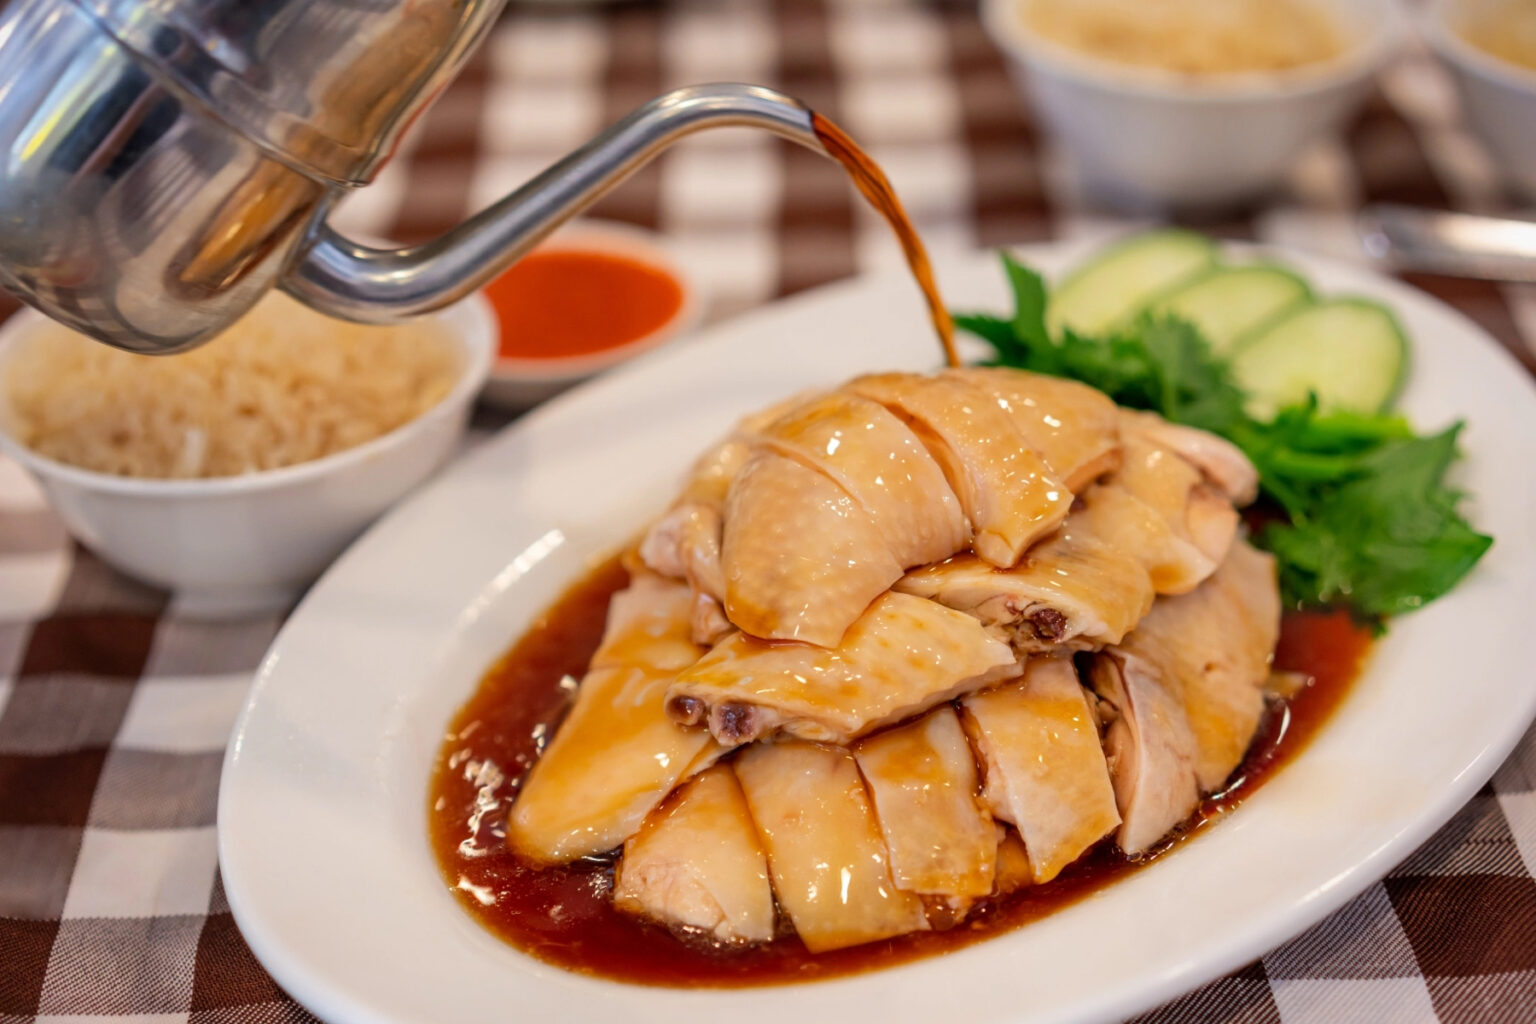 Spout pouring sauce on Hainanese steamed chicken at restaurant